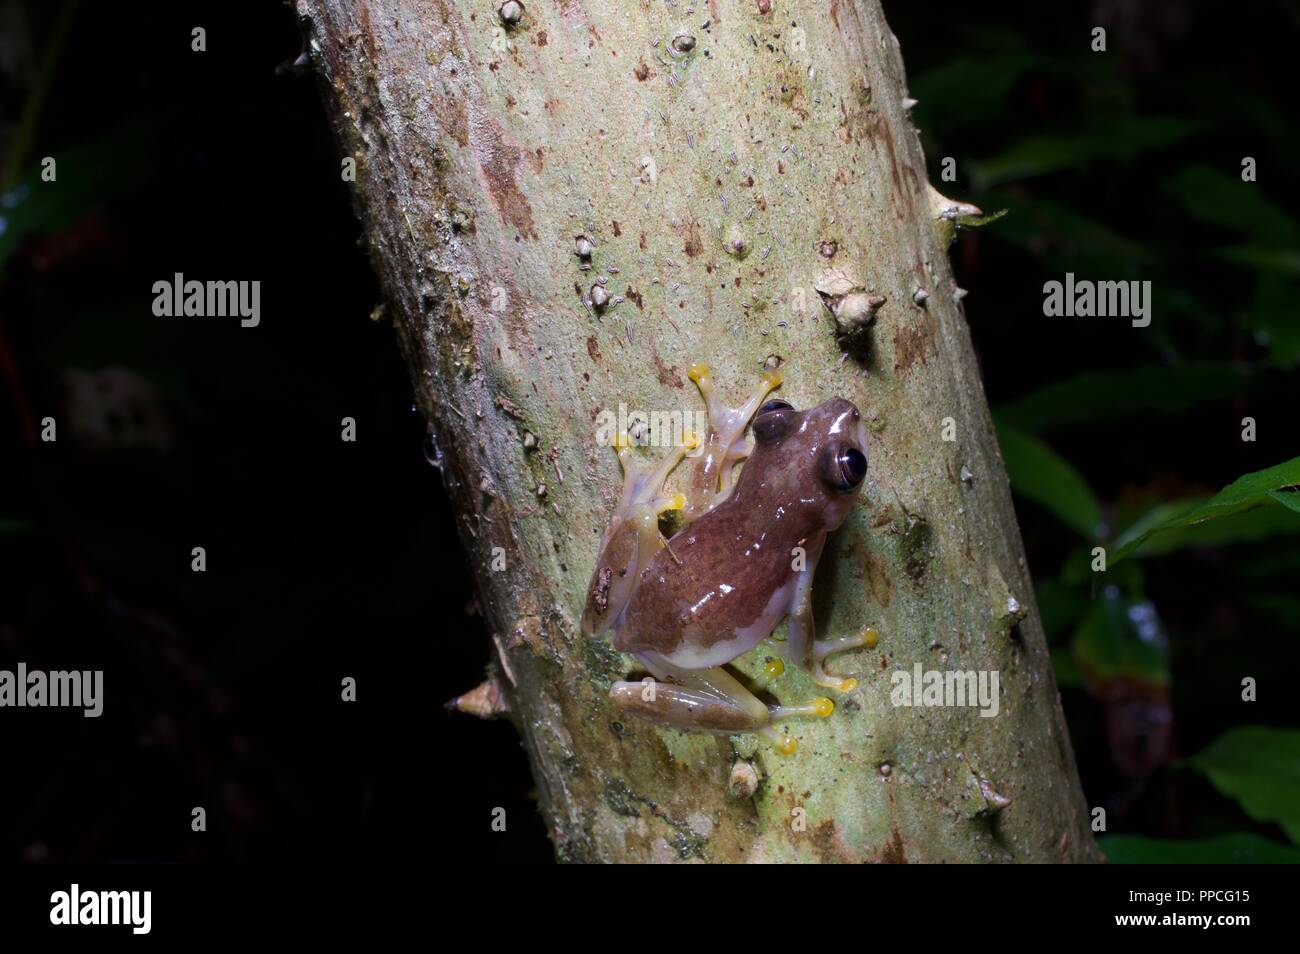 A leaf-folding frog (Afrixalus sp) on a thorny palm trunk at night in Atewa Range Forest Reserve, Ghana, West Africa Stock Photo